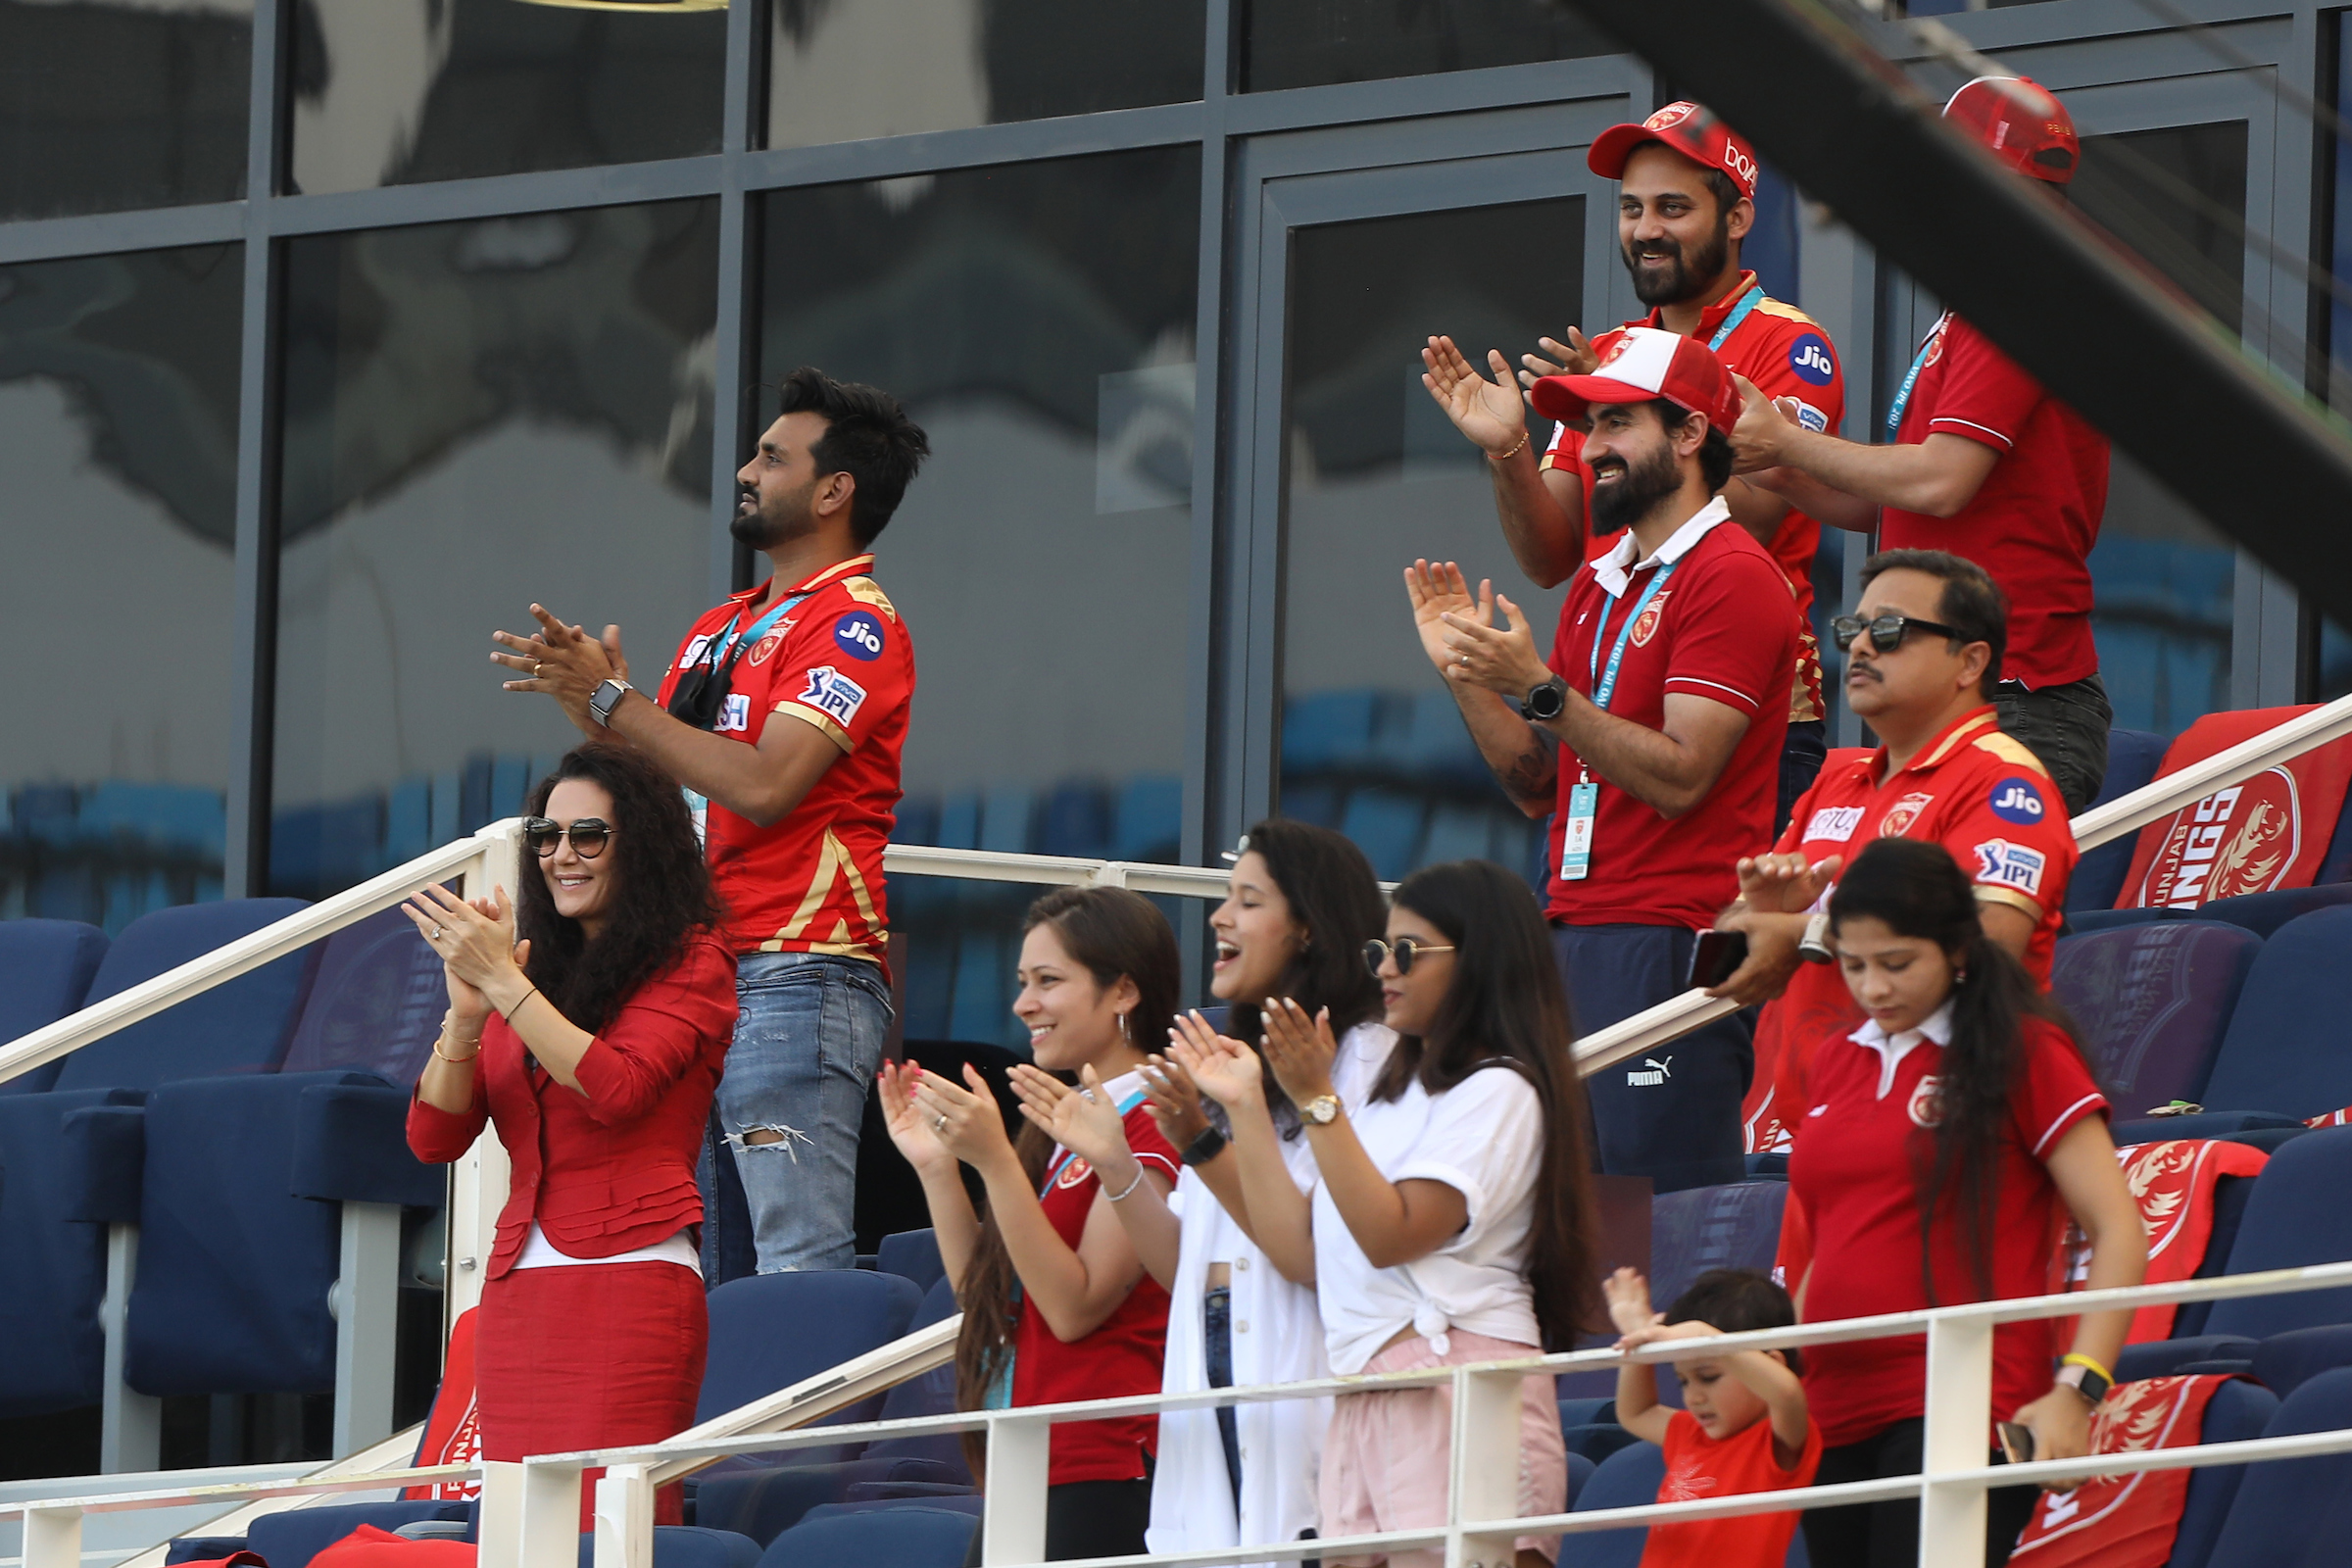 Preity Zinta Watches Kl Rahul Hit 98 Not Out As Punjab Win In Dubai In Pictures